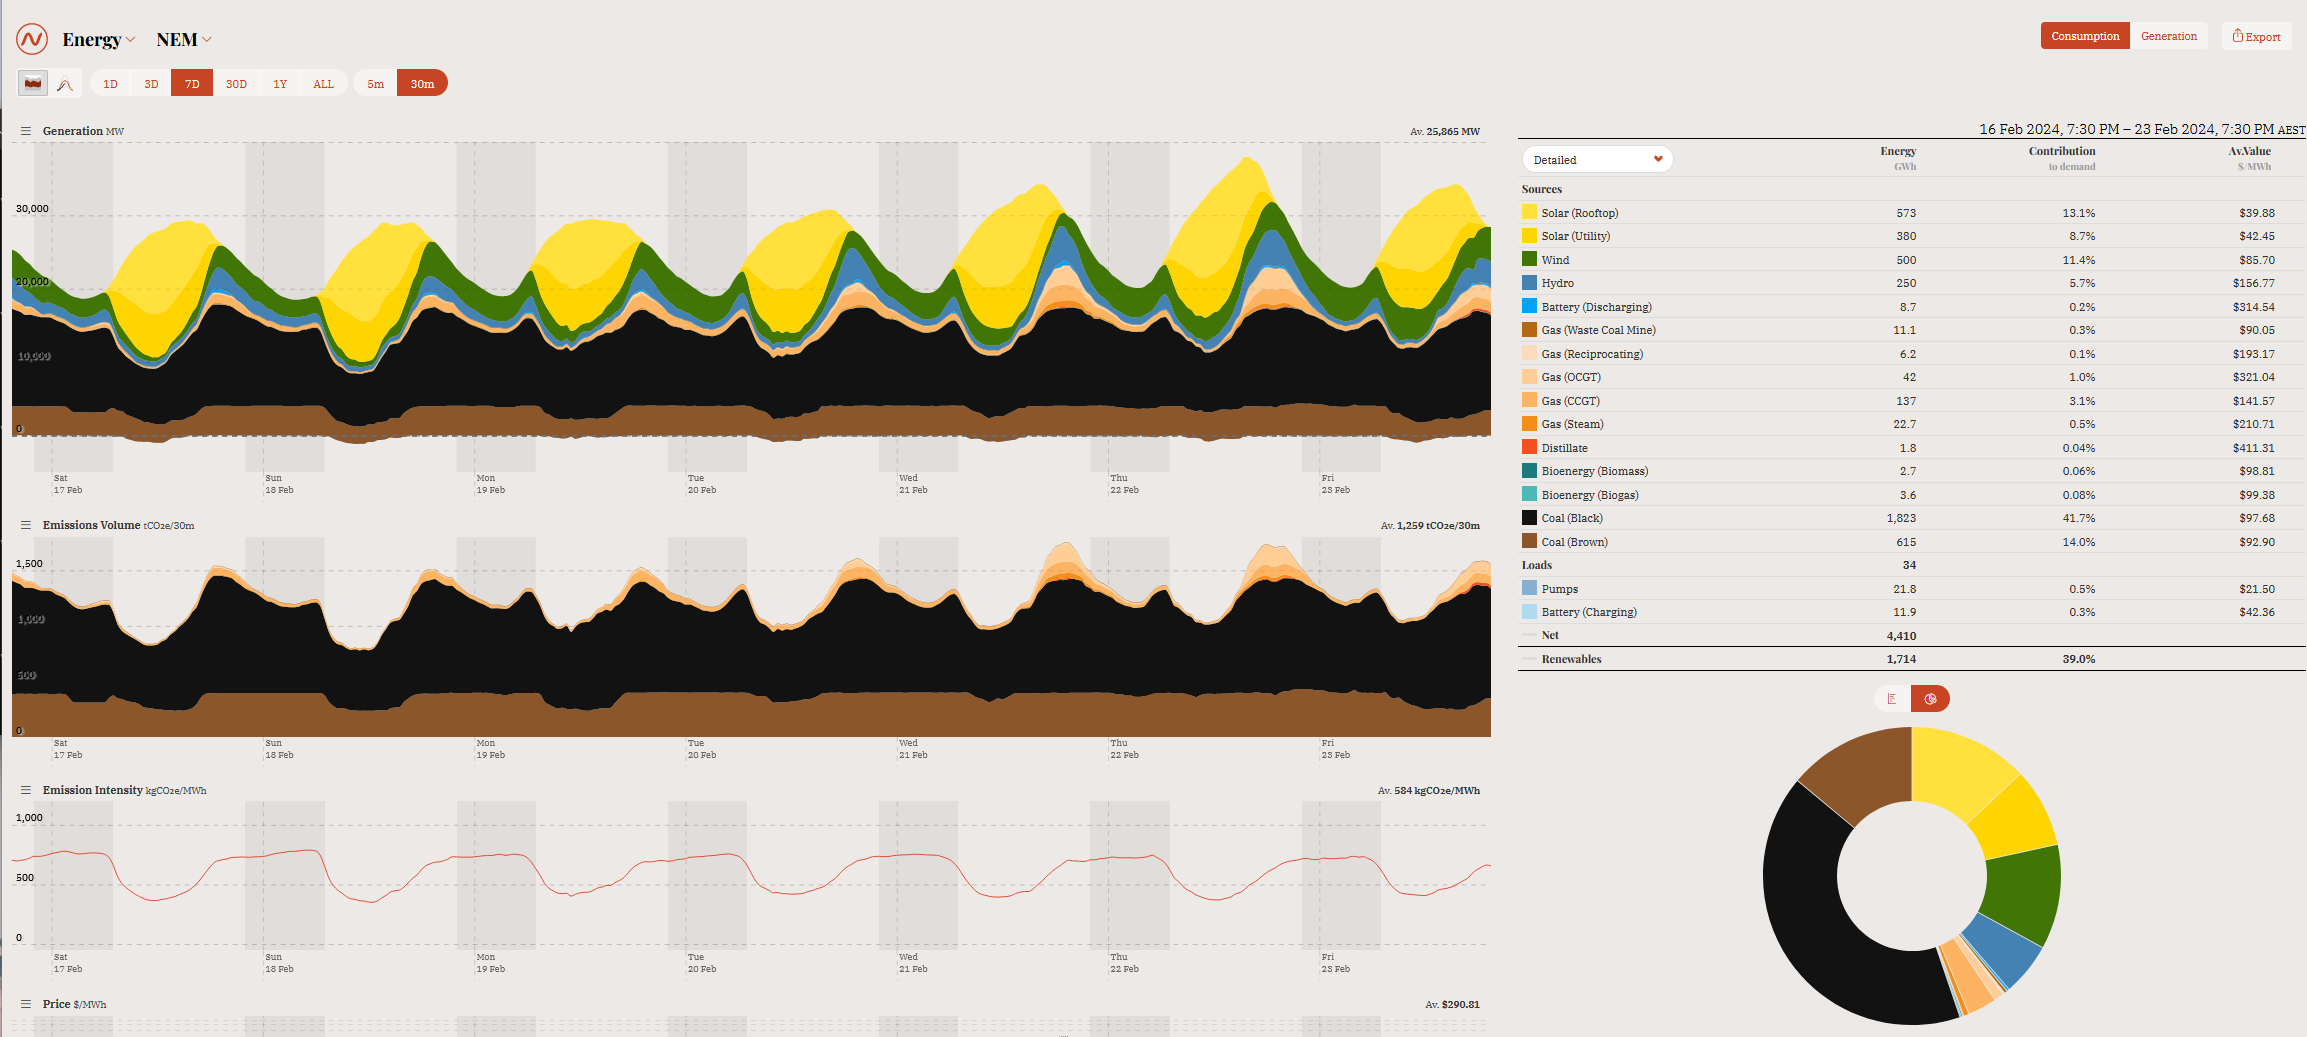 OpenNEM screenshot showing chart of electricity generation over 7 days by source